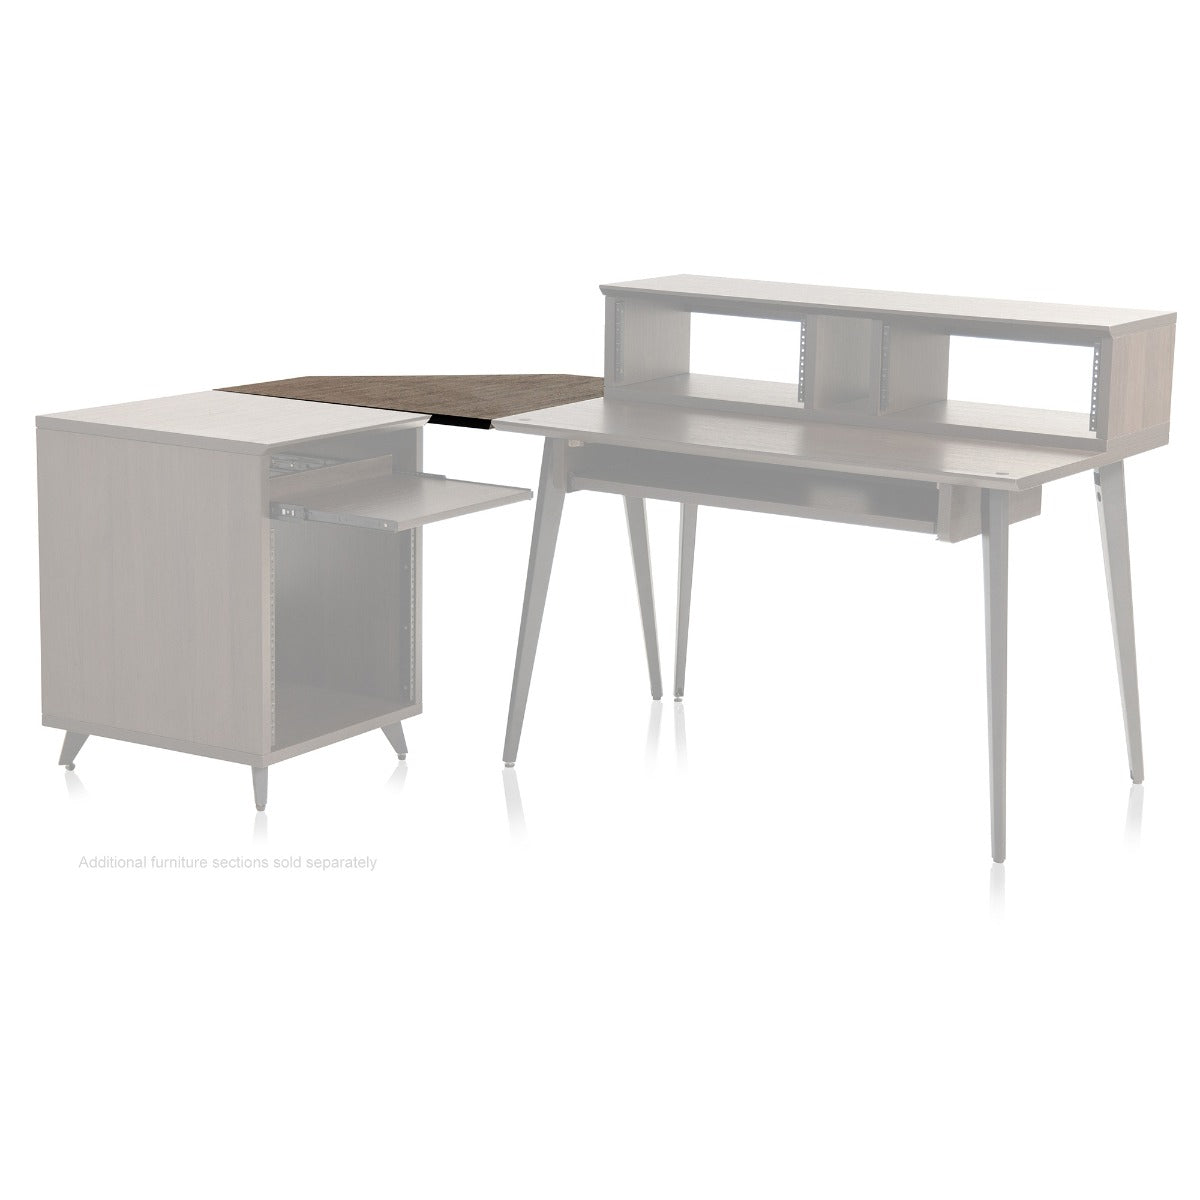 Gator Frameworks Elite Series Furniture Desk Corner Section  - Brown shown with the additional furniture sections